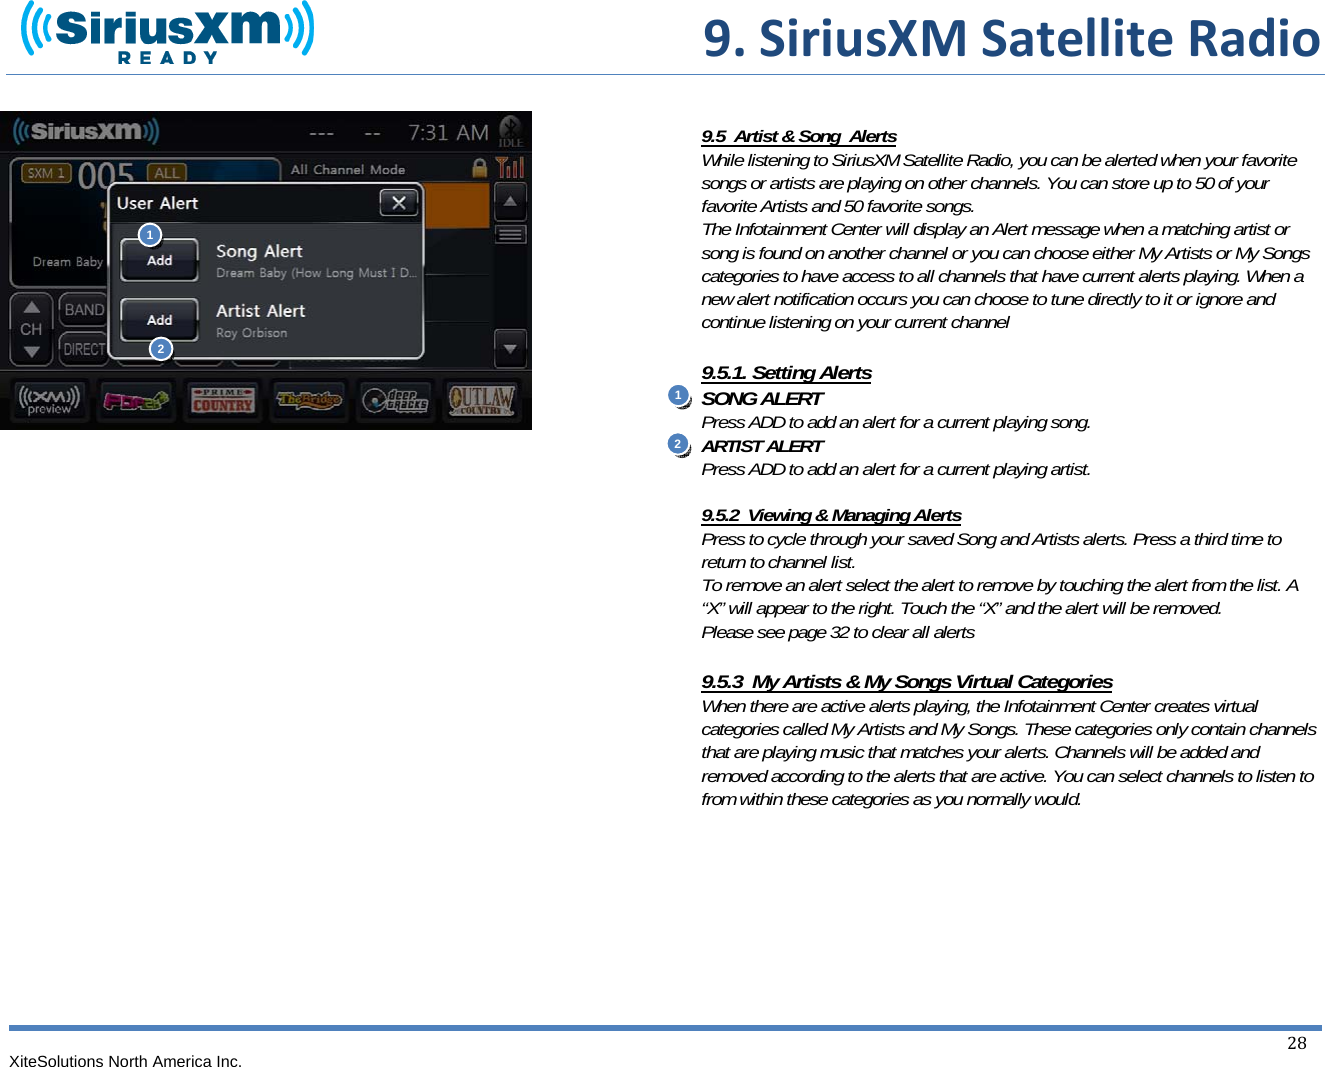  9.SiriusXMSatelliteRadioXiteSolutions North America Inc.  28                                  9.5  Artist &amp; Song  Alerts While listening to SiriusXM Satellite Radio, you can be alerted when your favorite songs or artists are playing on other channels. You can store up to 50 of your favorite Artists and 50 favorite songs. The Infotainment Center will display an Alert message when a matching artist or song is found on another channel or you can choose either My Artists or My Songs categories to have access to all channels that have current alerts playing. When a new alert notification occurs you can choose to tune directly to it or ignore and continue listening on your current channel  9.5.1. Setting Alerts SONG ALERT Press ADD to add an alert for a current playing song. ARTIST ALERT Press ADD to add an alert for a current playing artist.    9.5.2  Viewing &amp; Managing Alerts Press to cycle through your saved Song and Artists alerts. Press a third time to return to channel list. To remove an alert select the alert to remove by touching the alert from the list. A “X” will appear to the right. Touch the “X” and the alert will be removed. Please see page 32 to clear all alerts  9.5.3  My Artists &amp; My Songs Virtual Categories When there are active alerts playing, the Infotainment Center creates virtual categories called My Artists and My Songs. These categories only contain channels that are playing music that matches your alerts. Channels will be added and removed according to the alerts that are active. You can select channels to listen to from within these categories as you normally would.        112 2